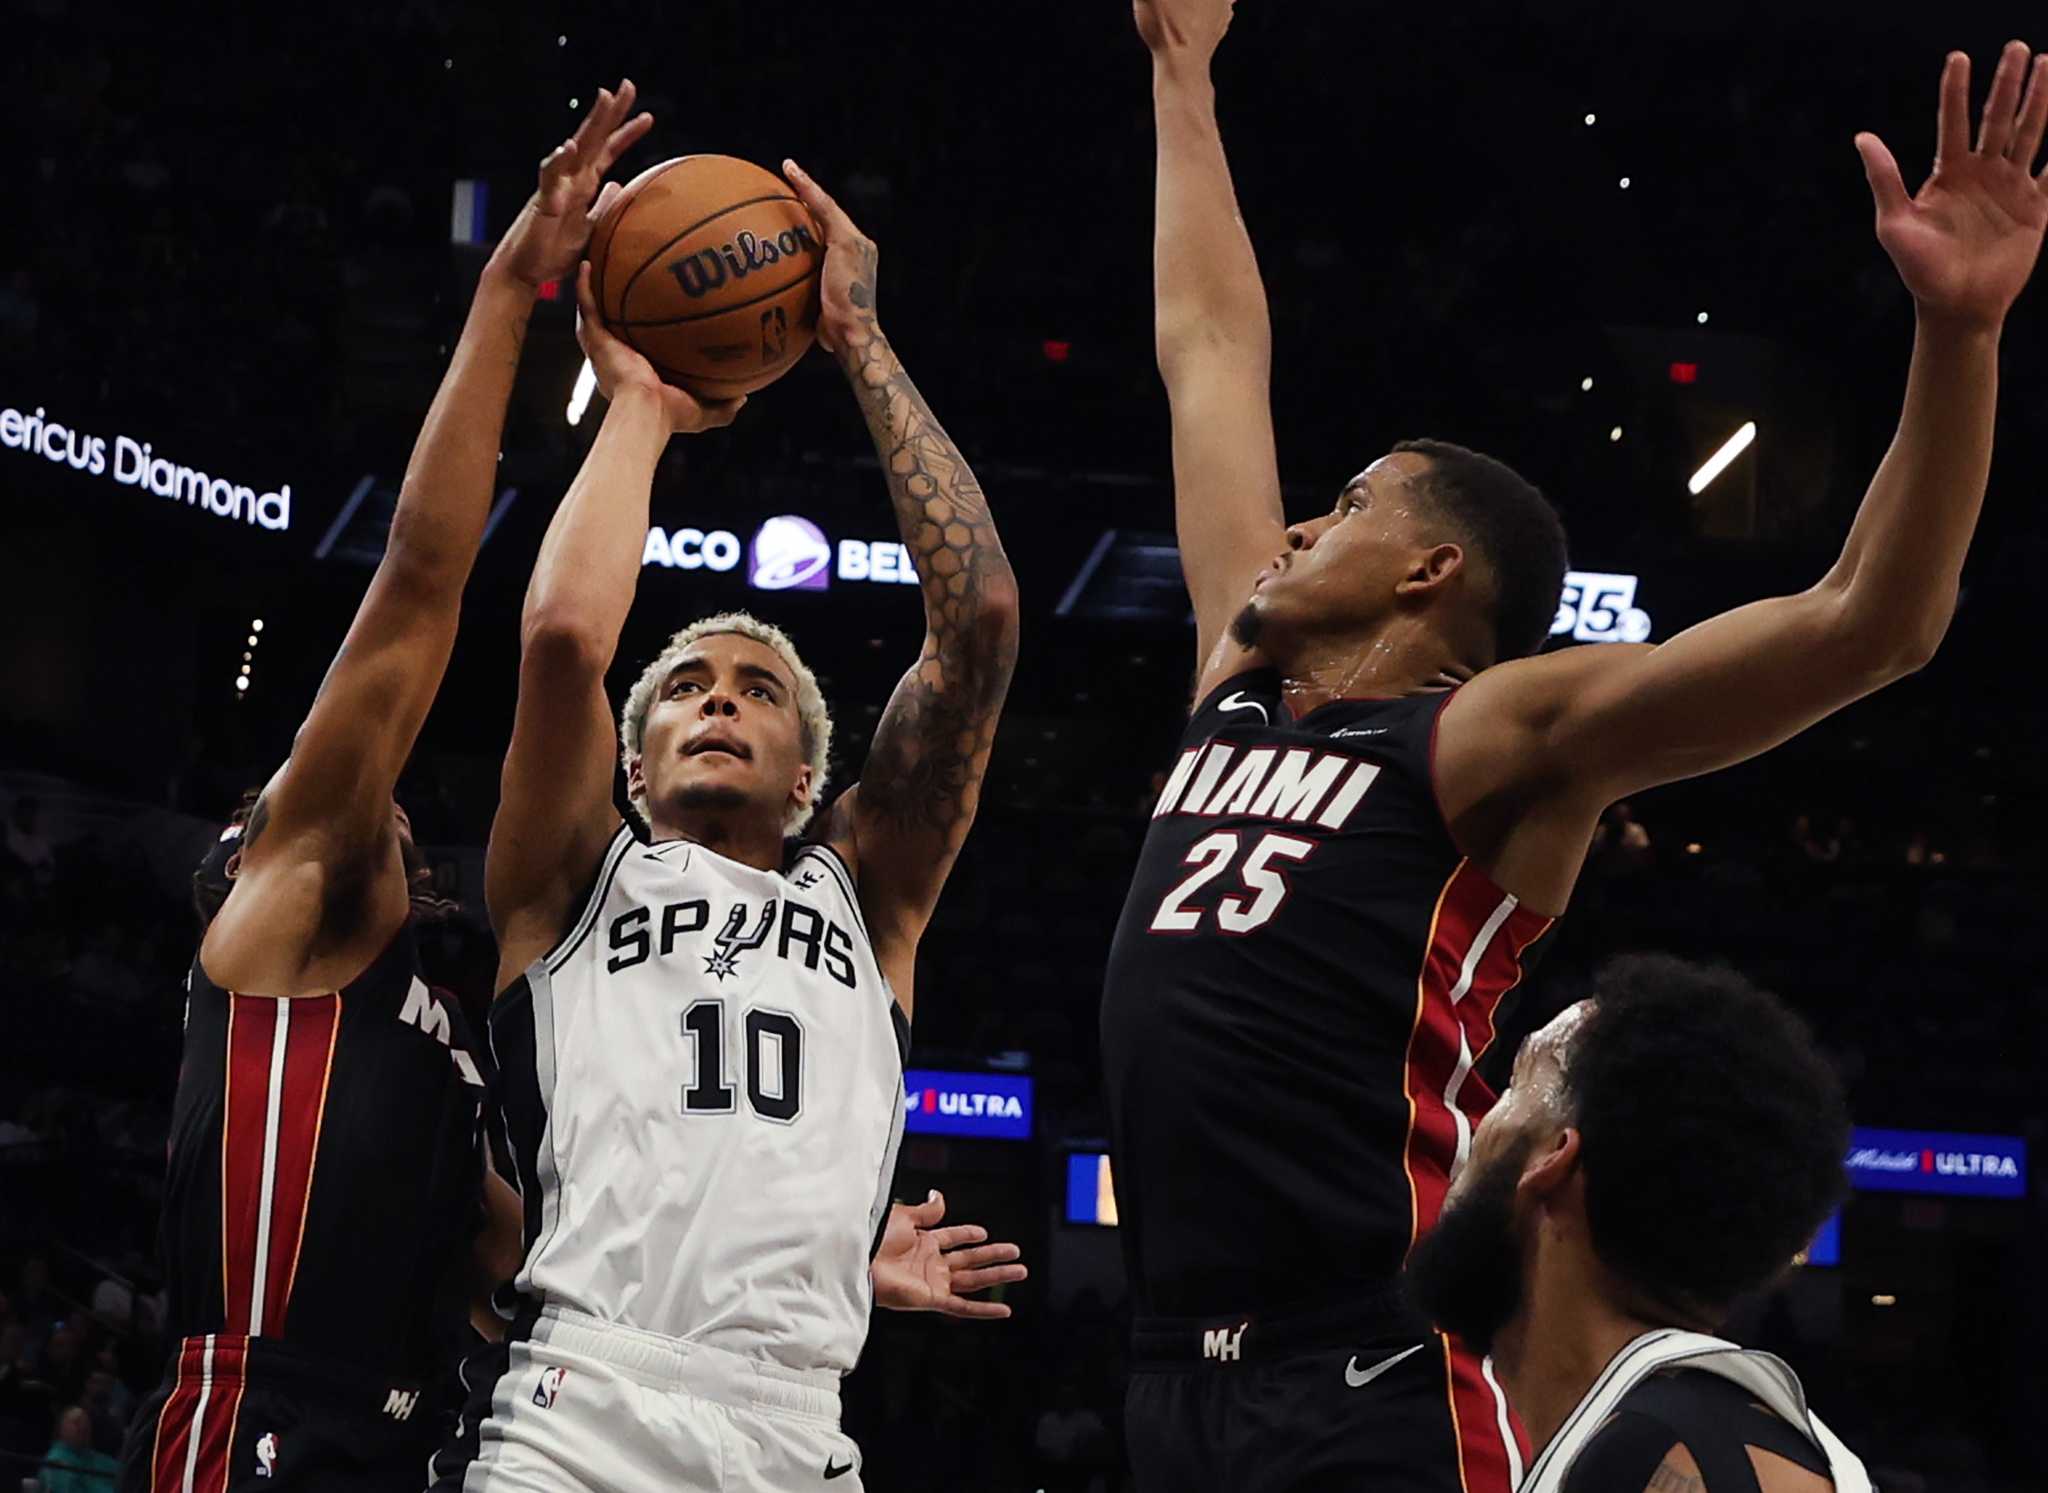 With new lineup, Spurs' reach could be endless